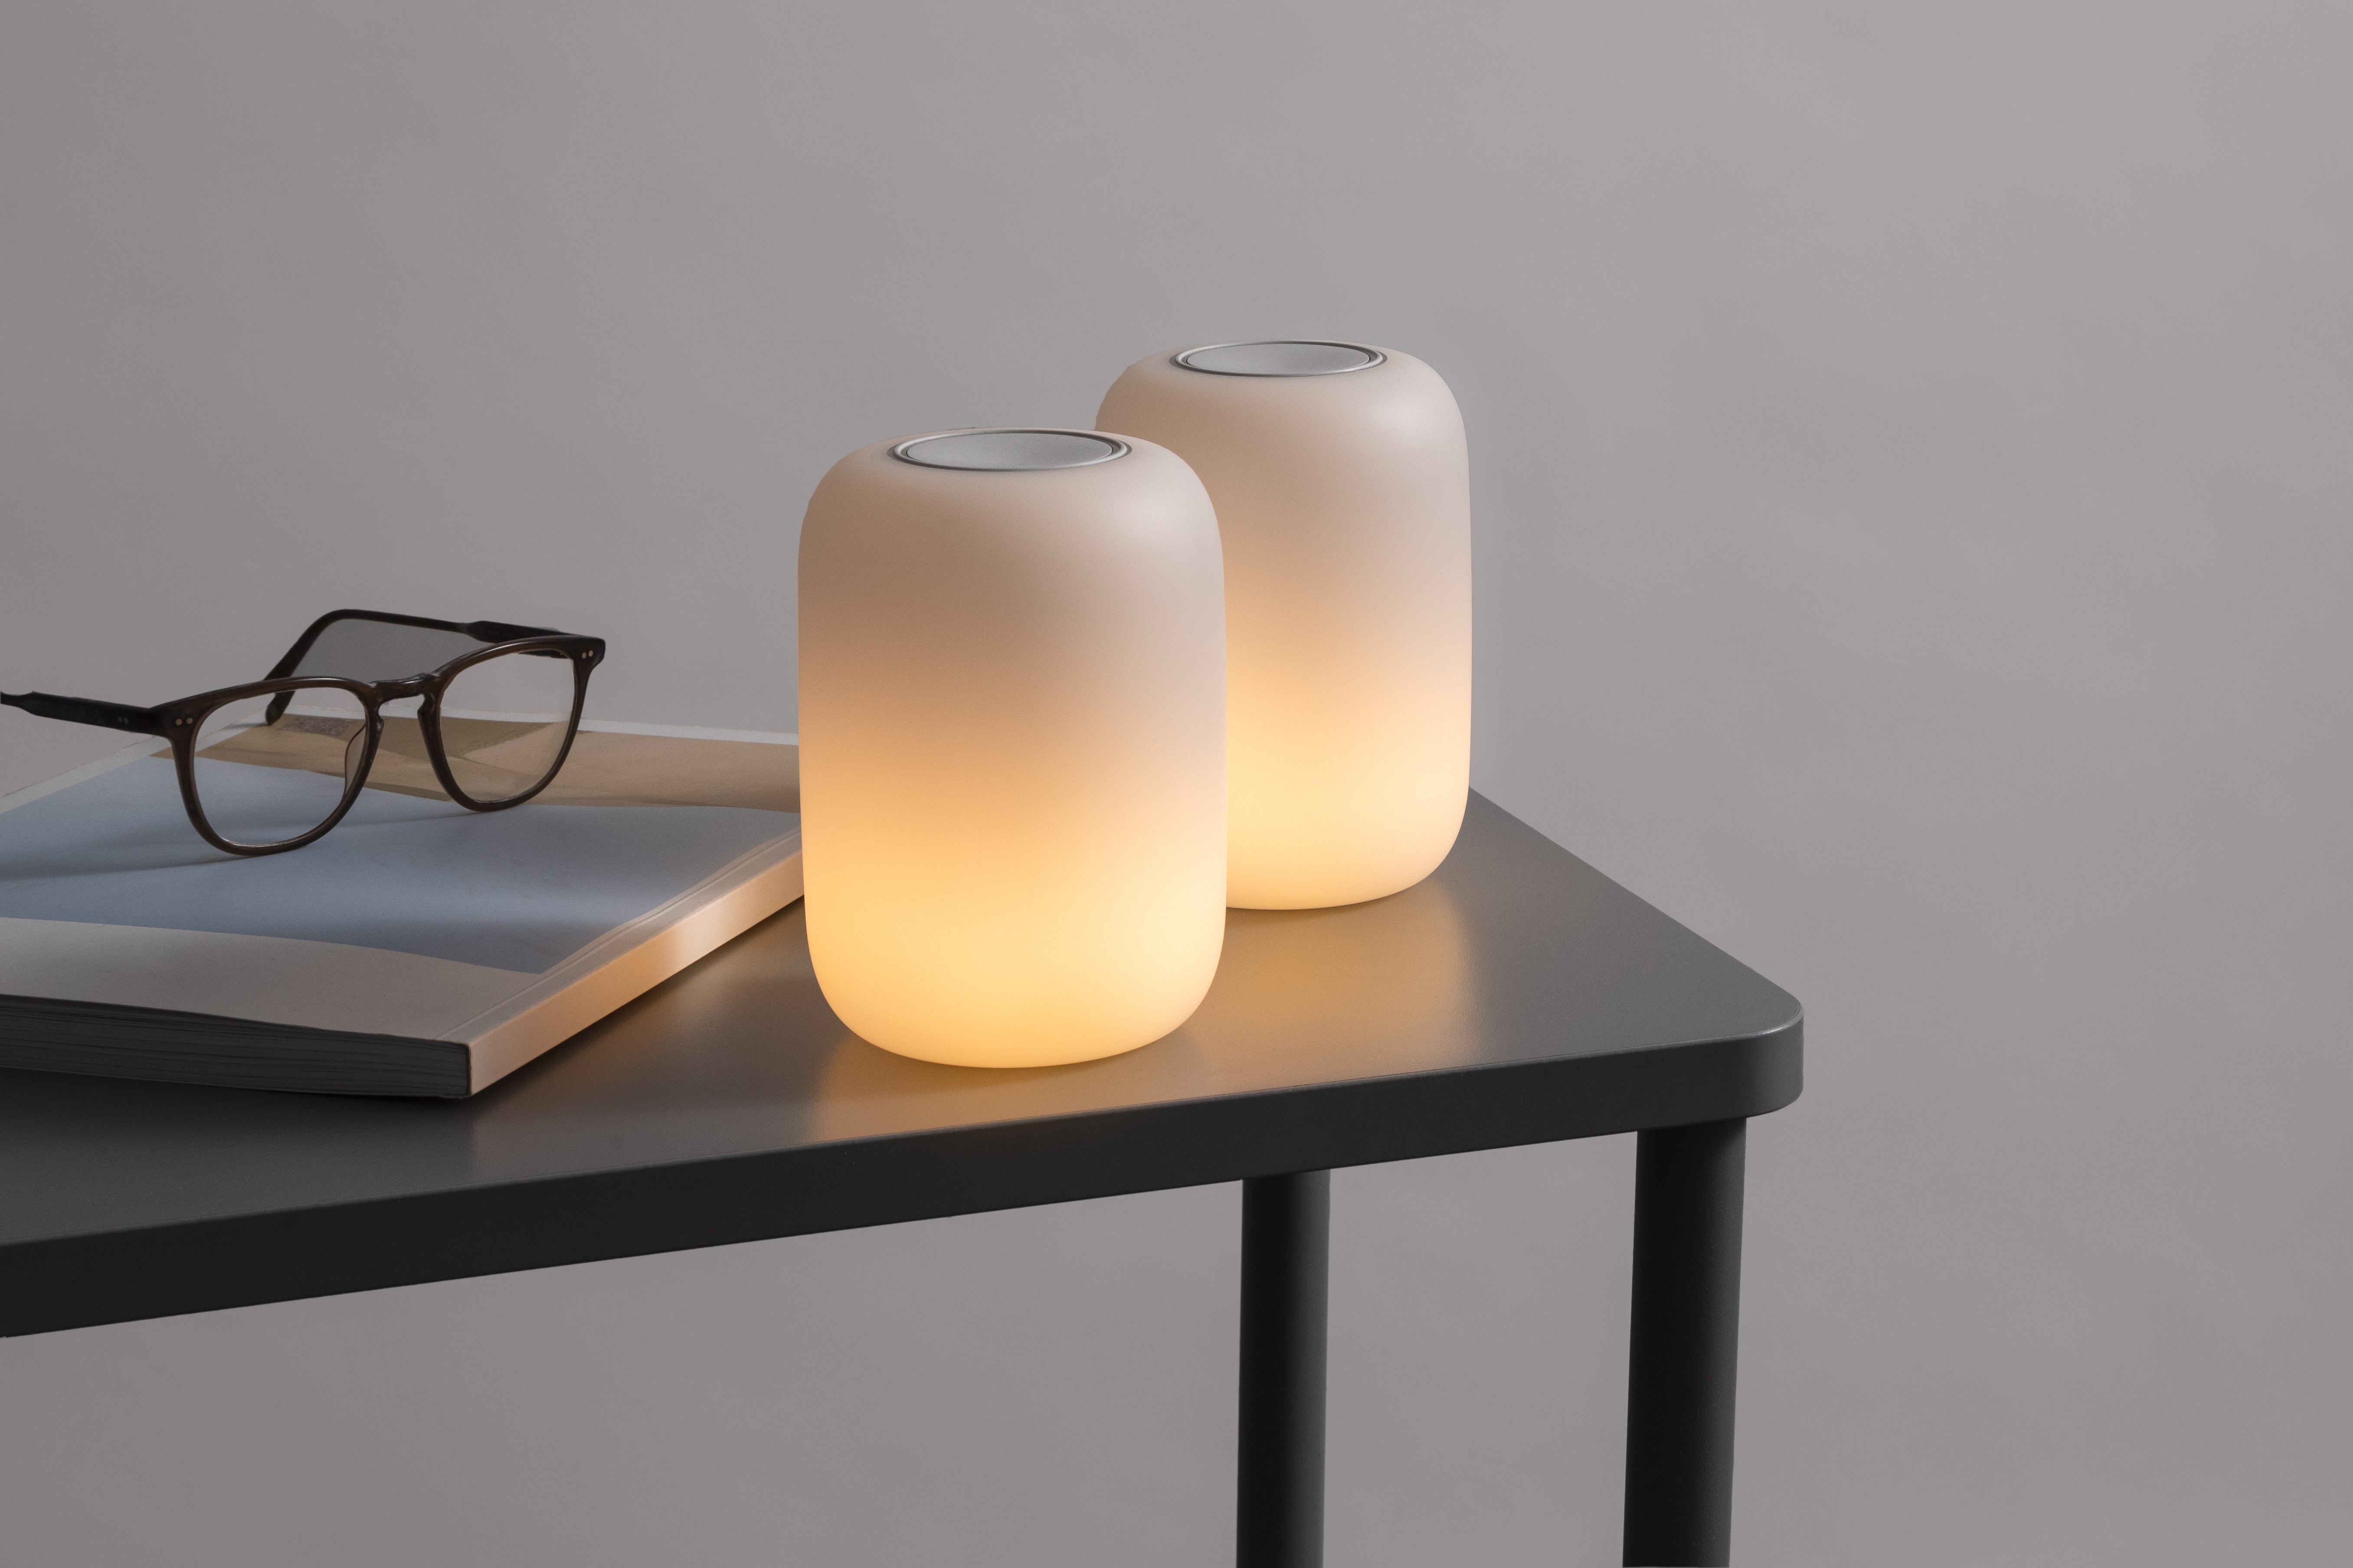 Two pill-shaped Casper Glow lights partially dimmed sitting on a bedside table with some books and a pair of glasses